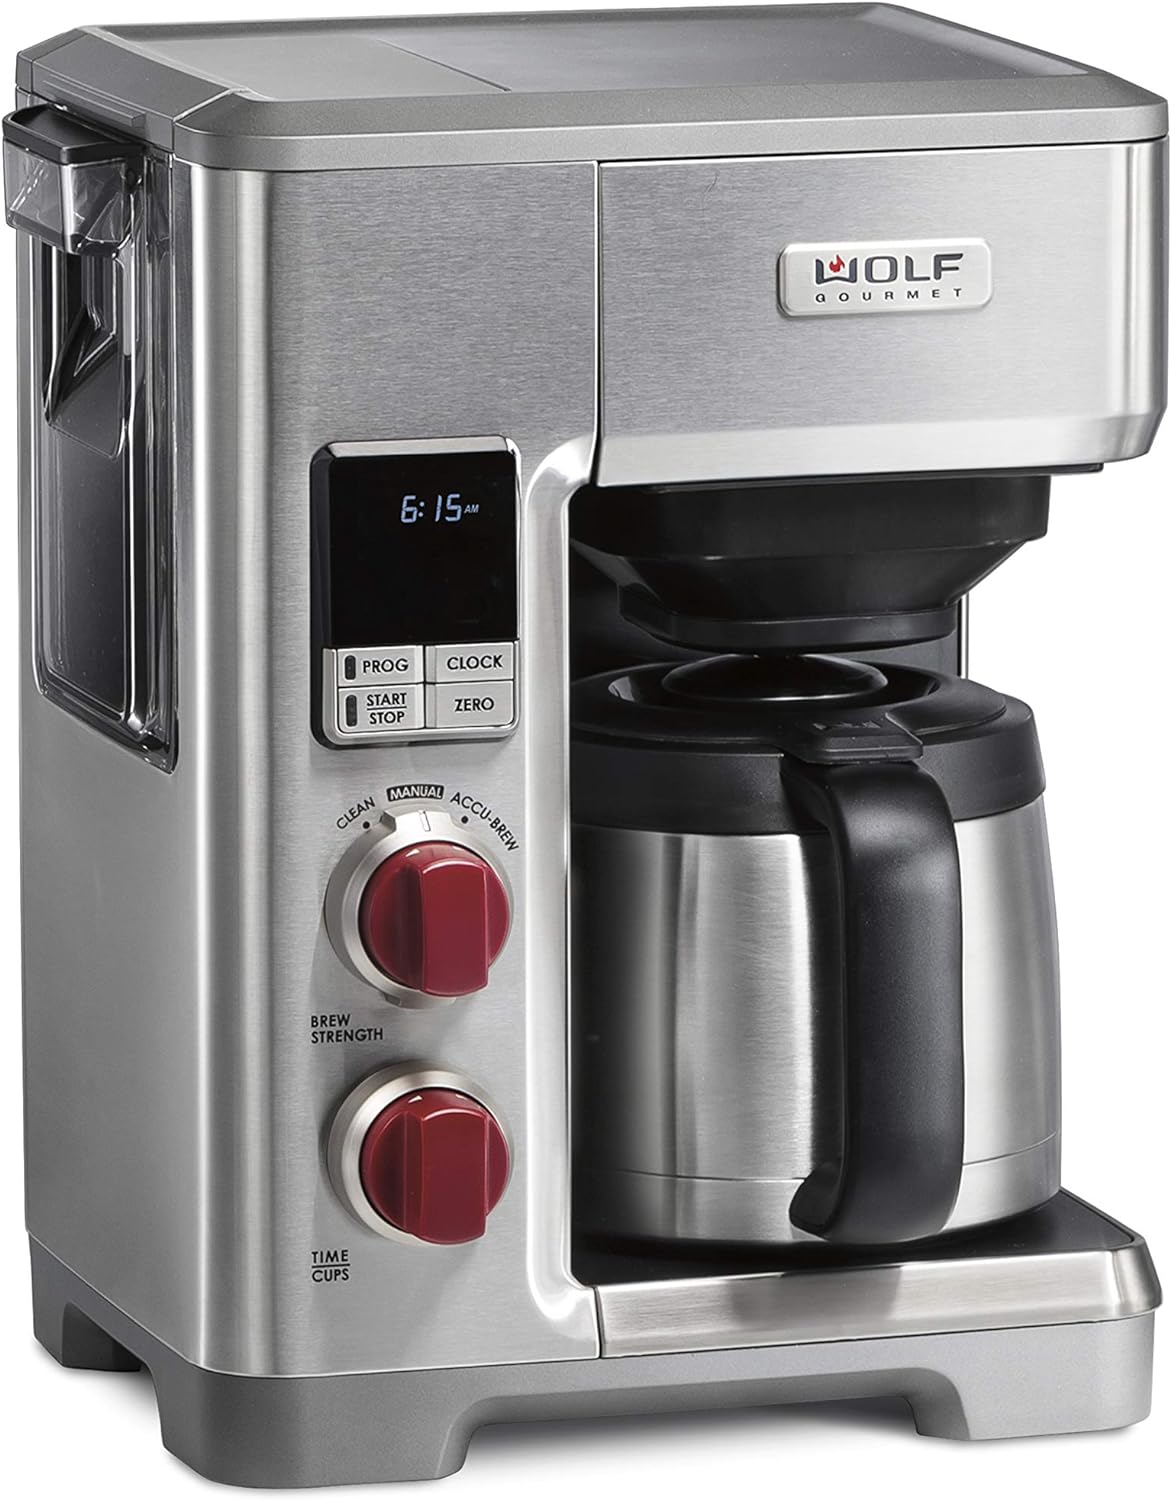 WOLF GOURMET Programmable Coffee Maker System with 10 Cup Thermal Carafe, Built-In Grounds Scale, Removable Reservoir, Red Knob, Stainless Steel (WGCM100S)